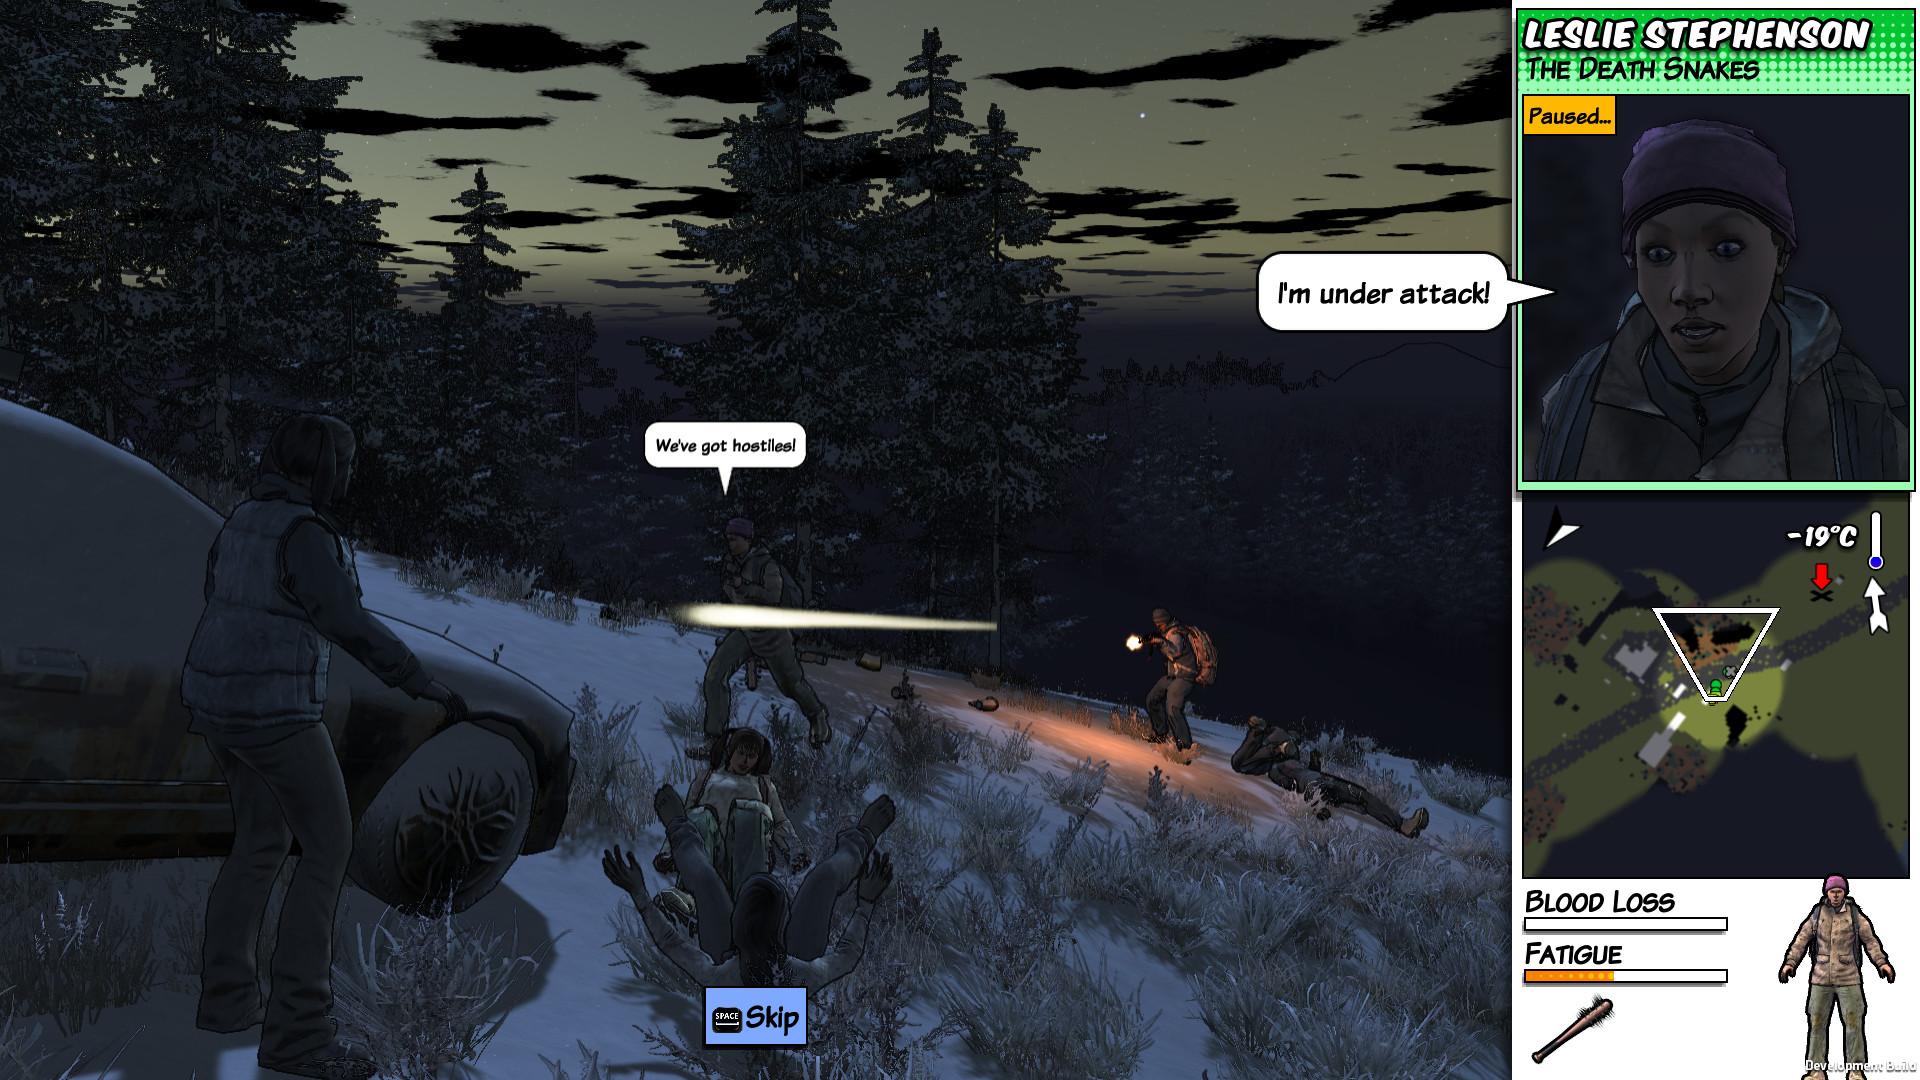 Screenshot №2 from game Survivalist: Invisible Strain